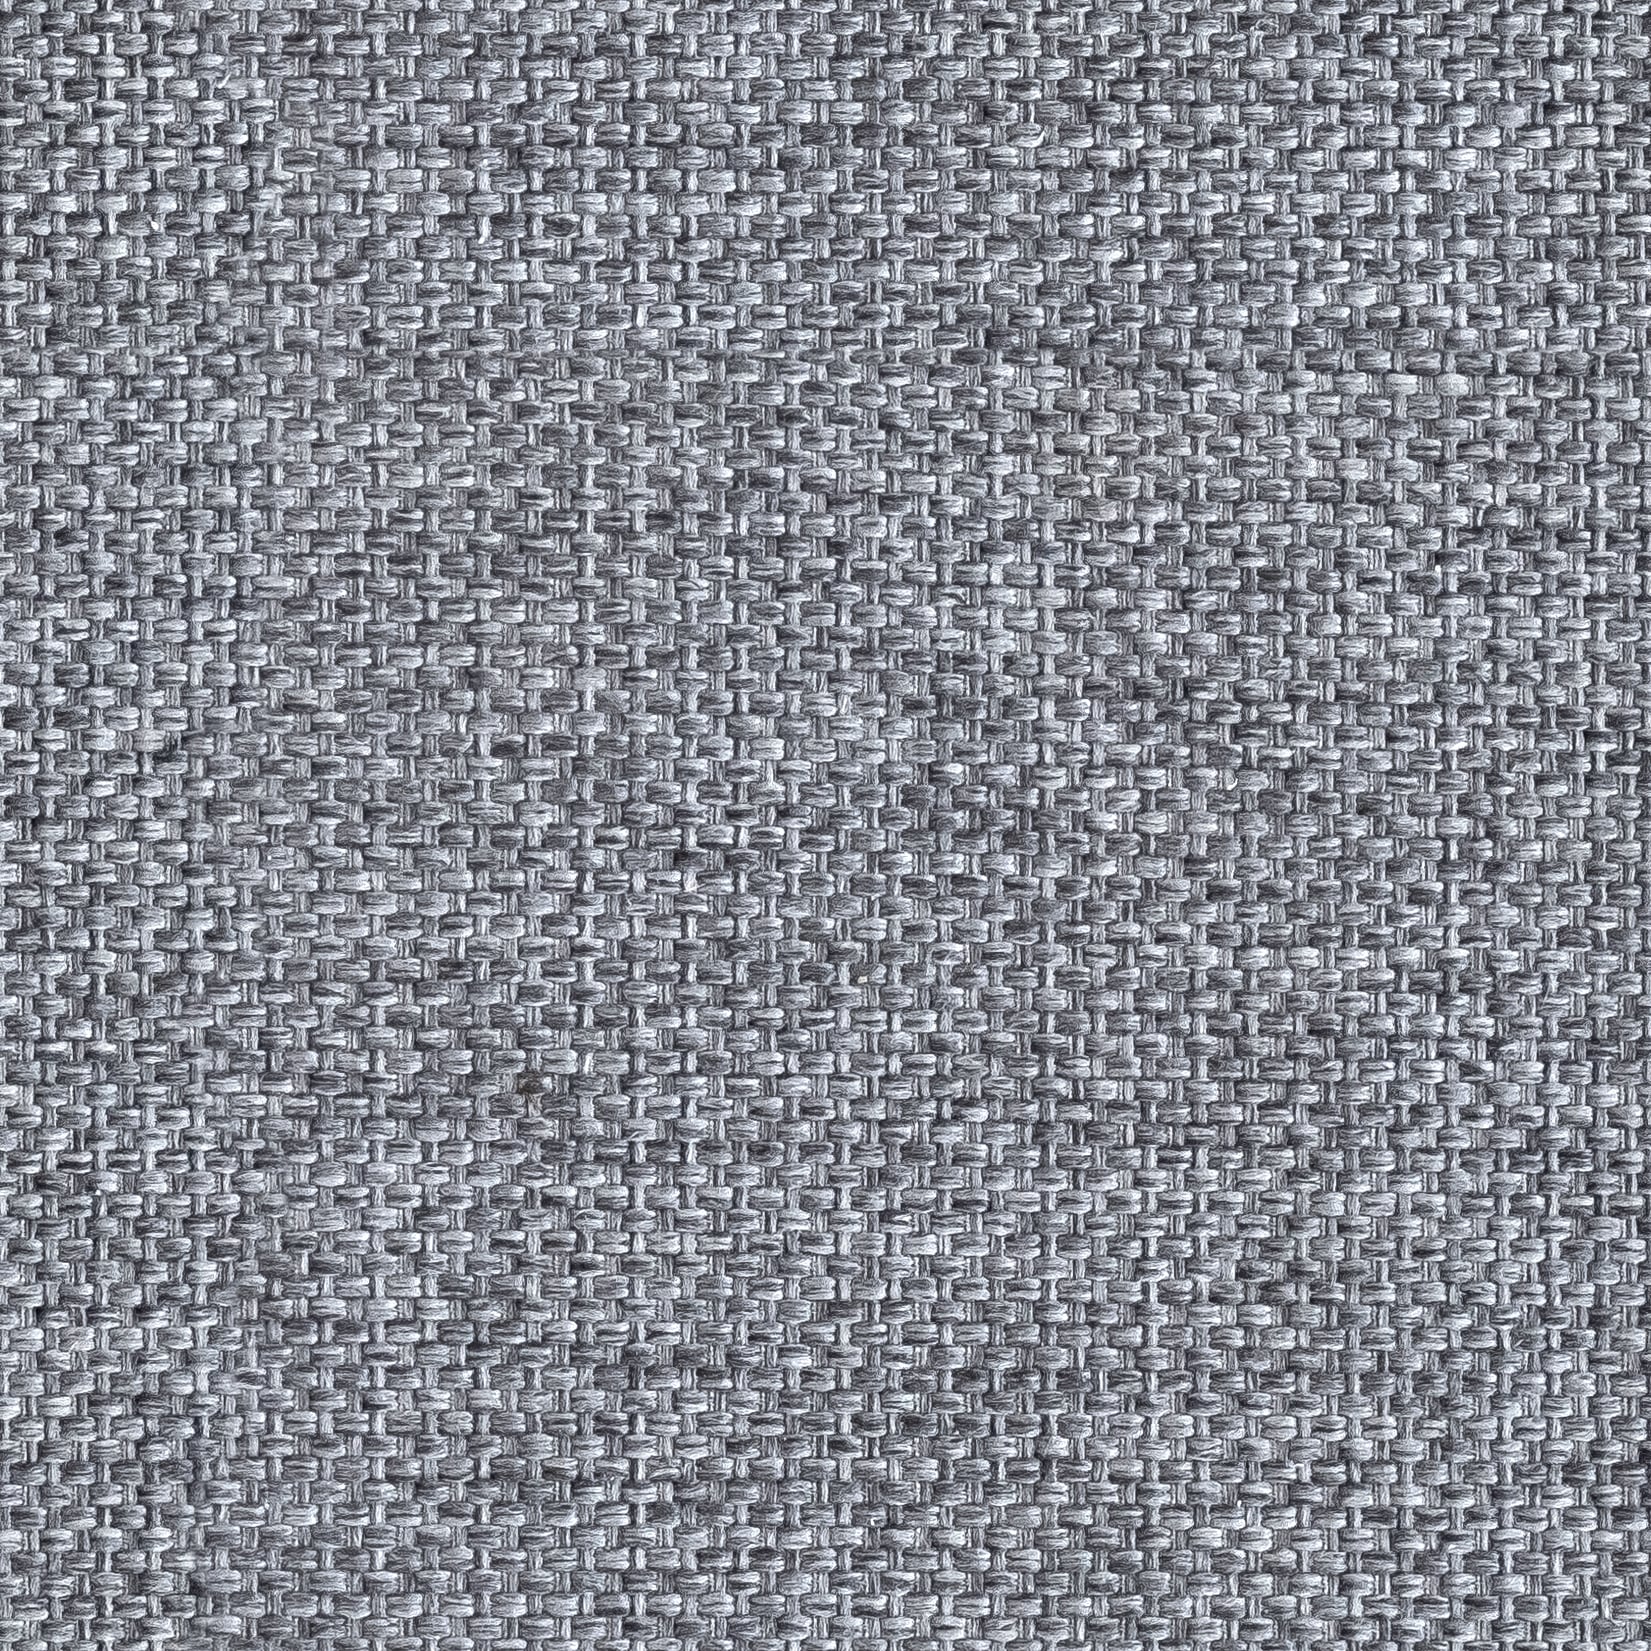 Fabric Texture Seamless Free Download - Image to u